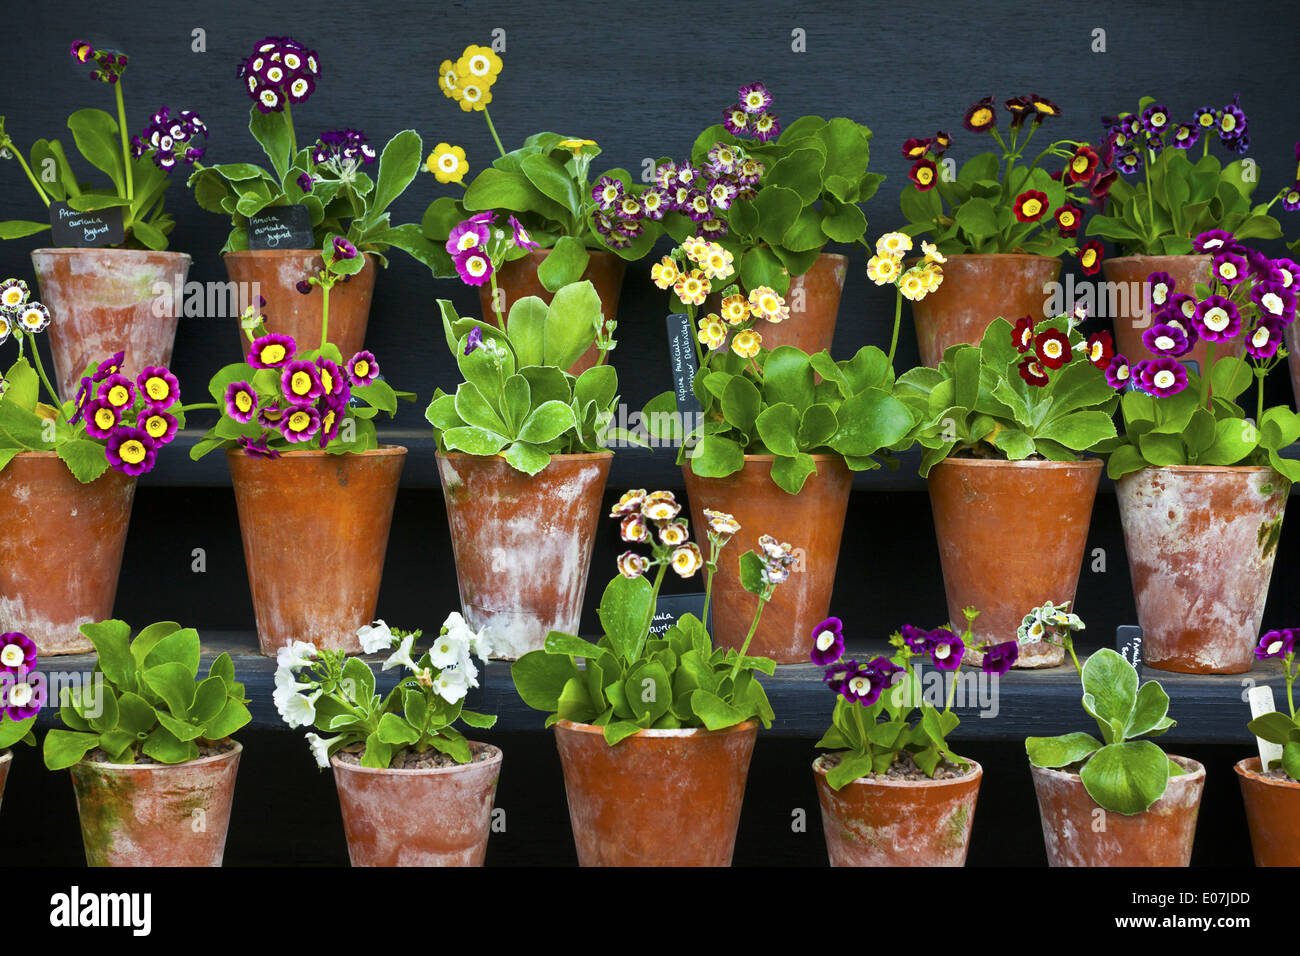 Rows of Primula Auricula Primulaceae plants in a terracotta pots. Stock Photo